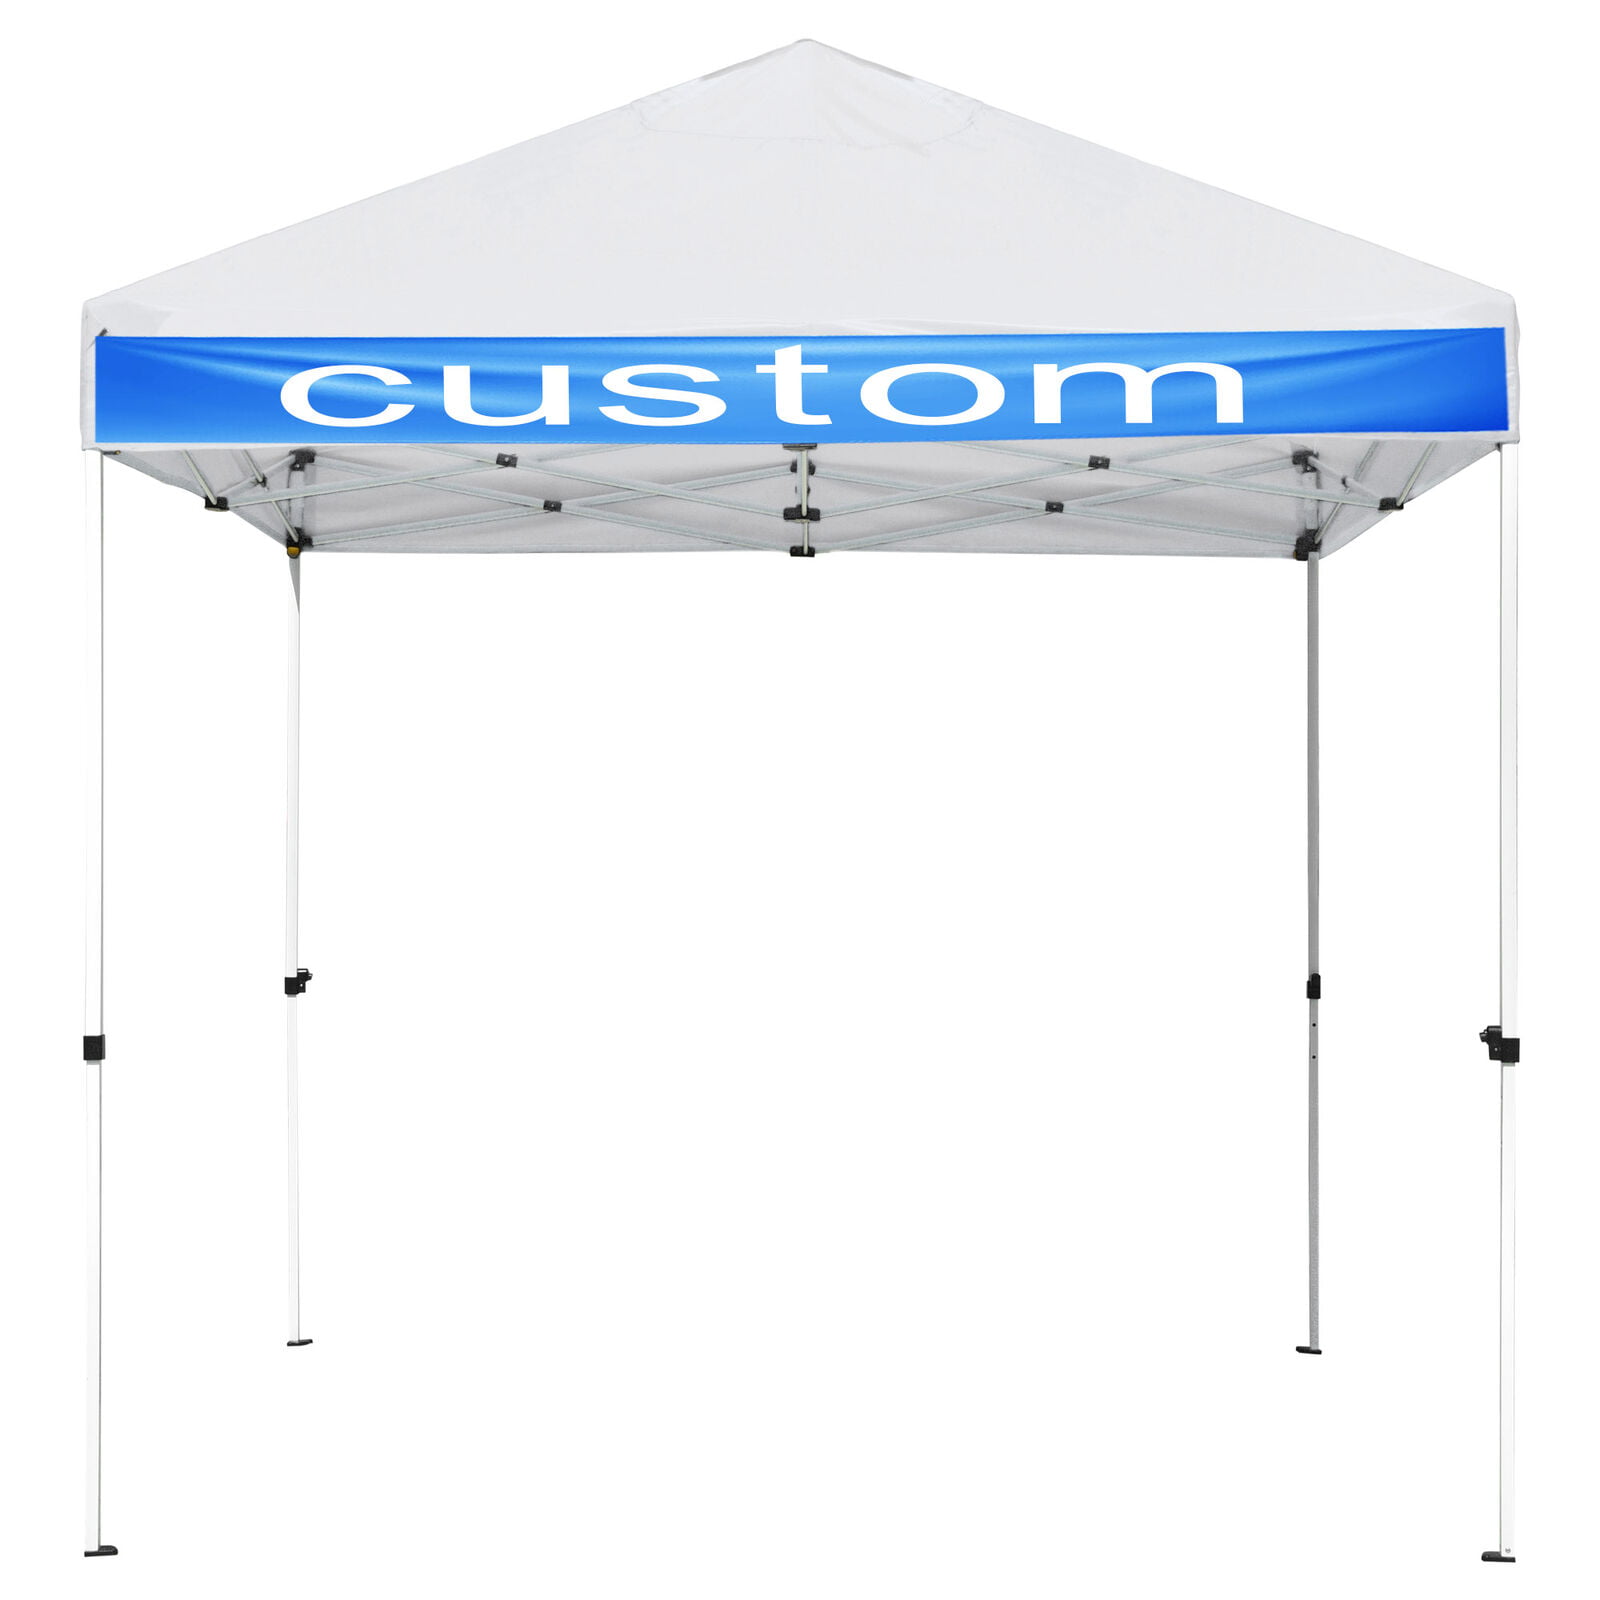 EZ Pop Up Canopy Outdoor Commercial Sunshade Wedding Party Instant Tent 10' 20' 